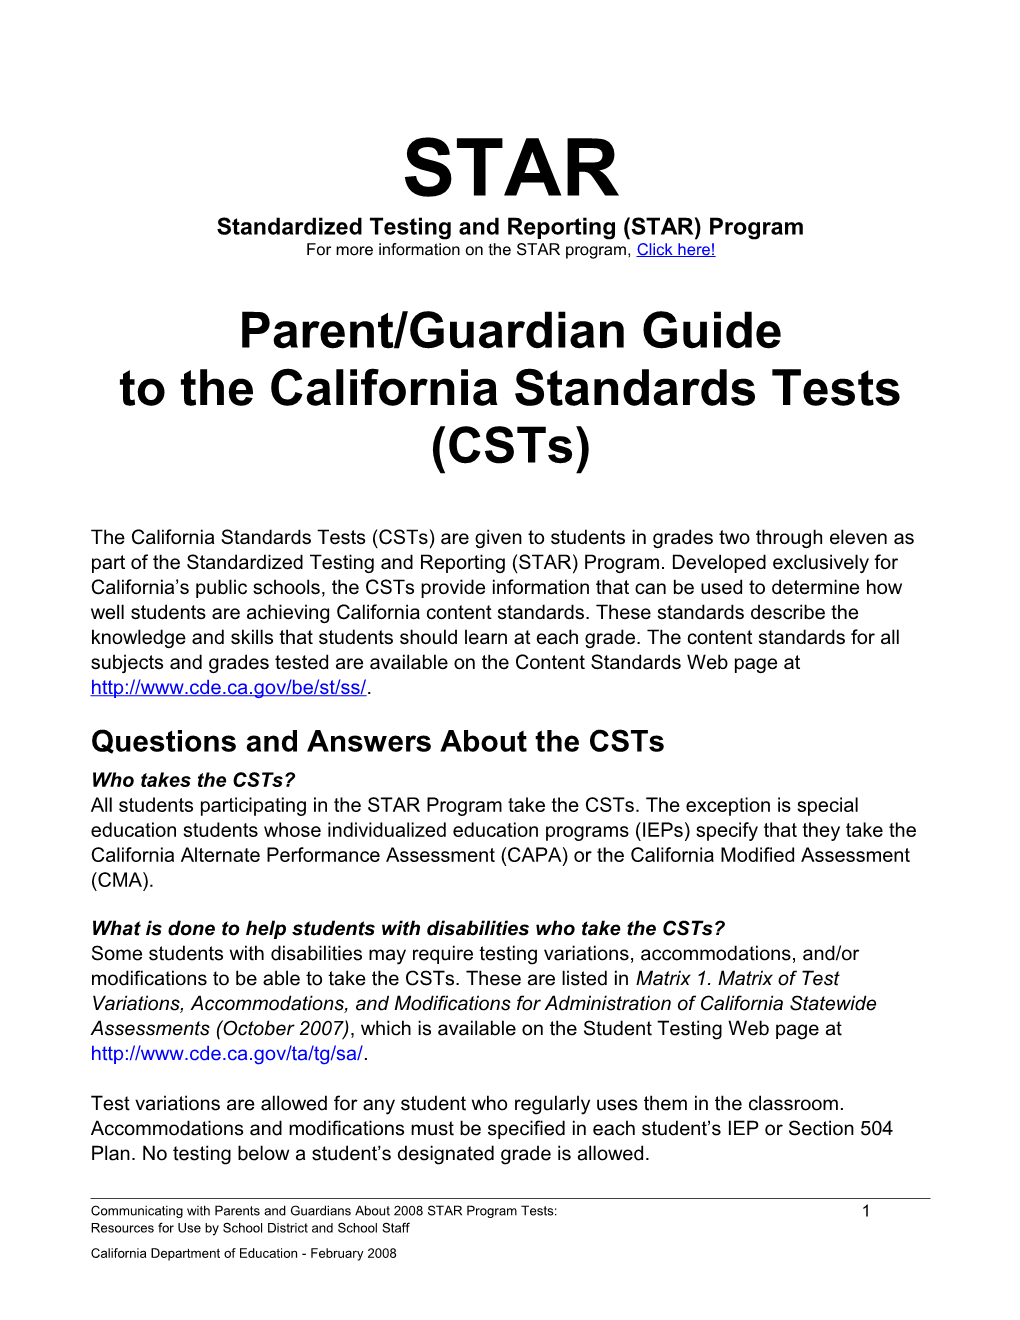 Csts Parent Guide - Stnadardized Testing and Reporting (CA Dept of Education)